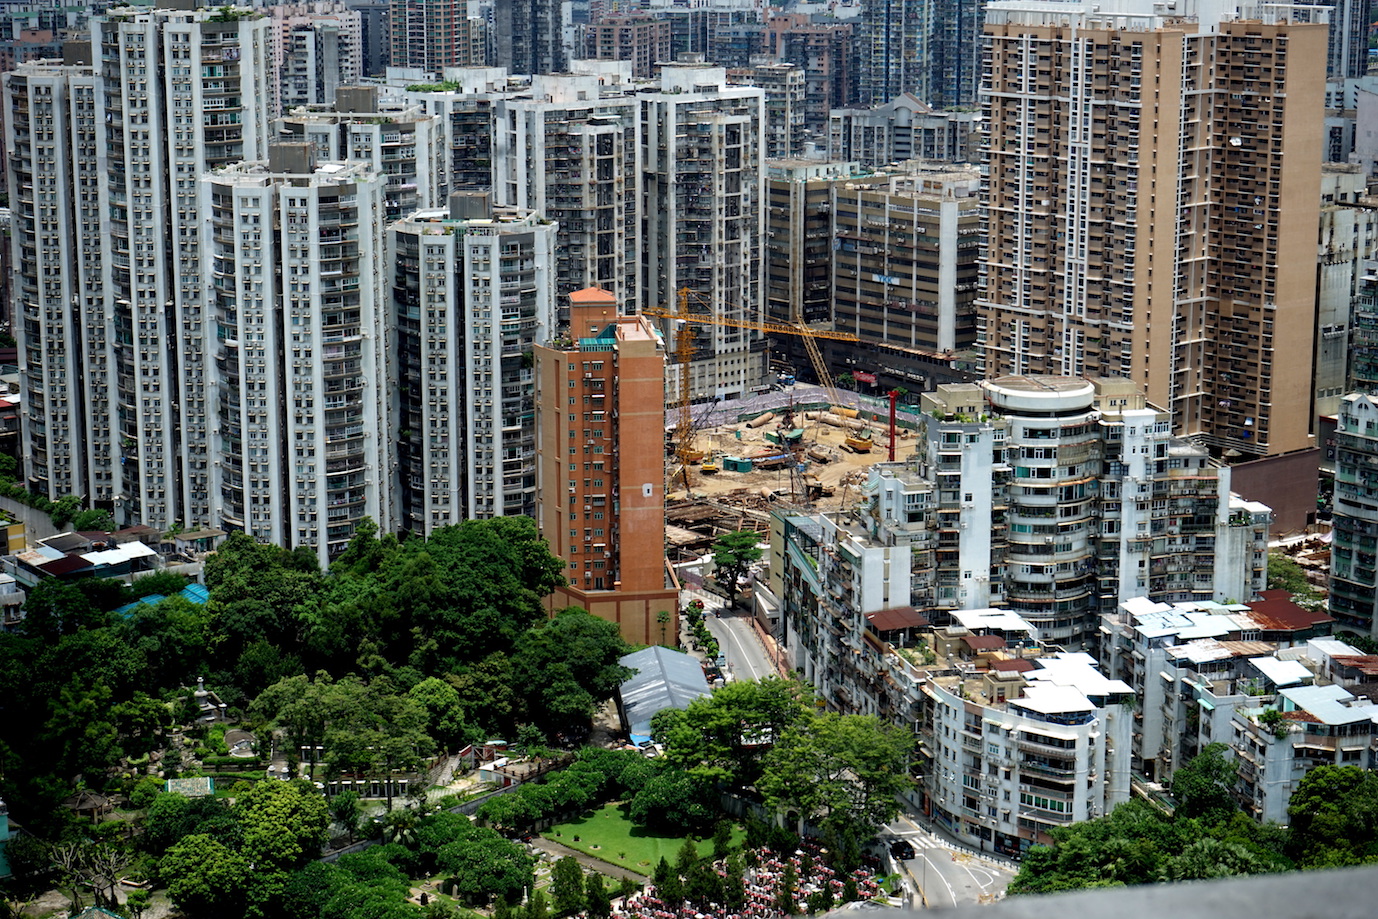 Residential property prices rise 7.5 pct in 2018: official